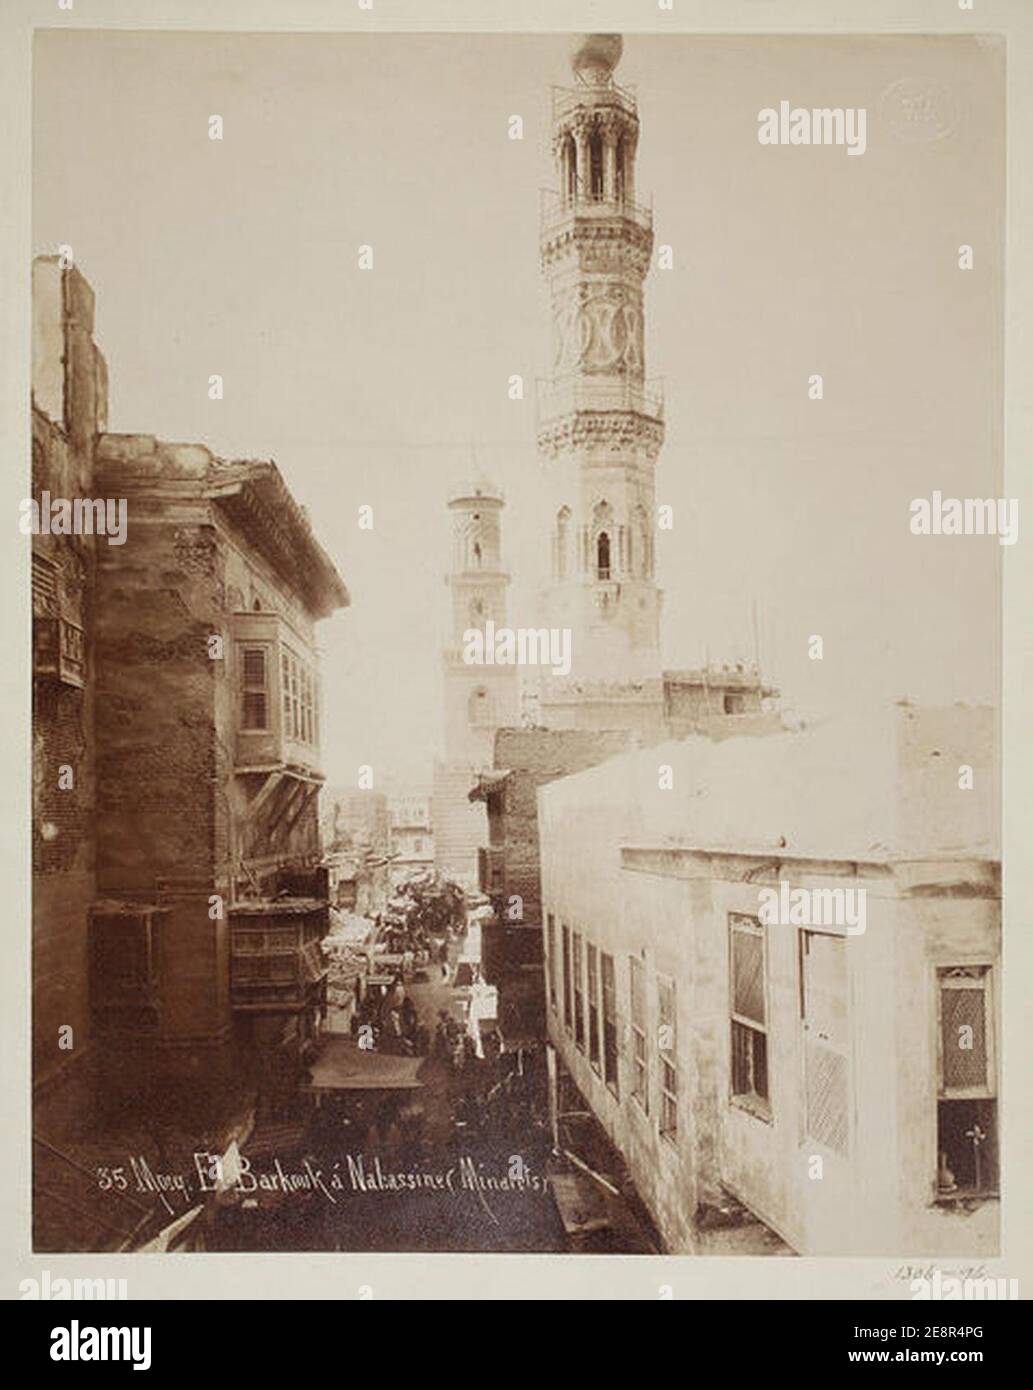 Minarets of the funerary complexes of Mamluk Sultans Qalawun and Barquq. Stock Photo